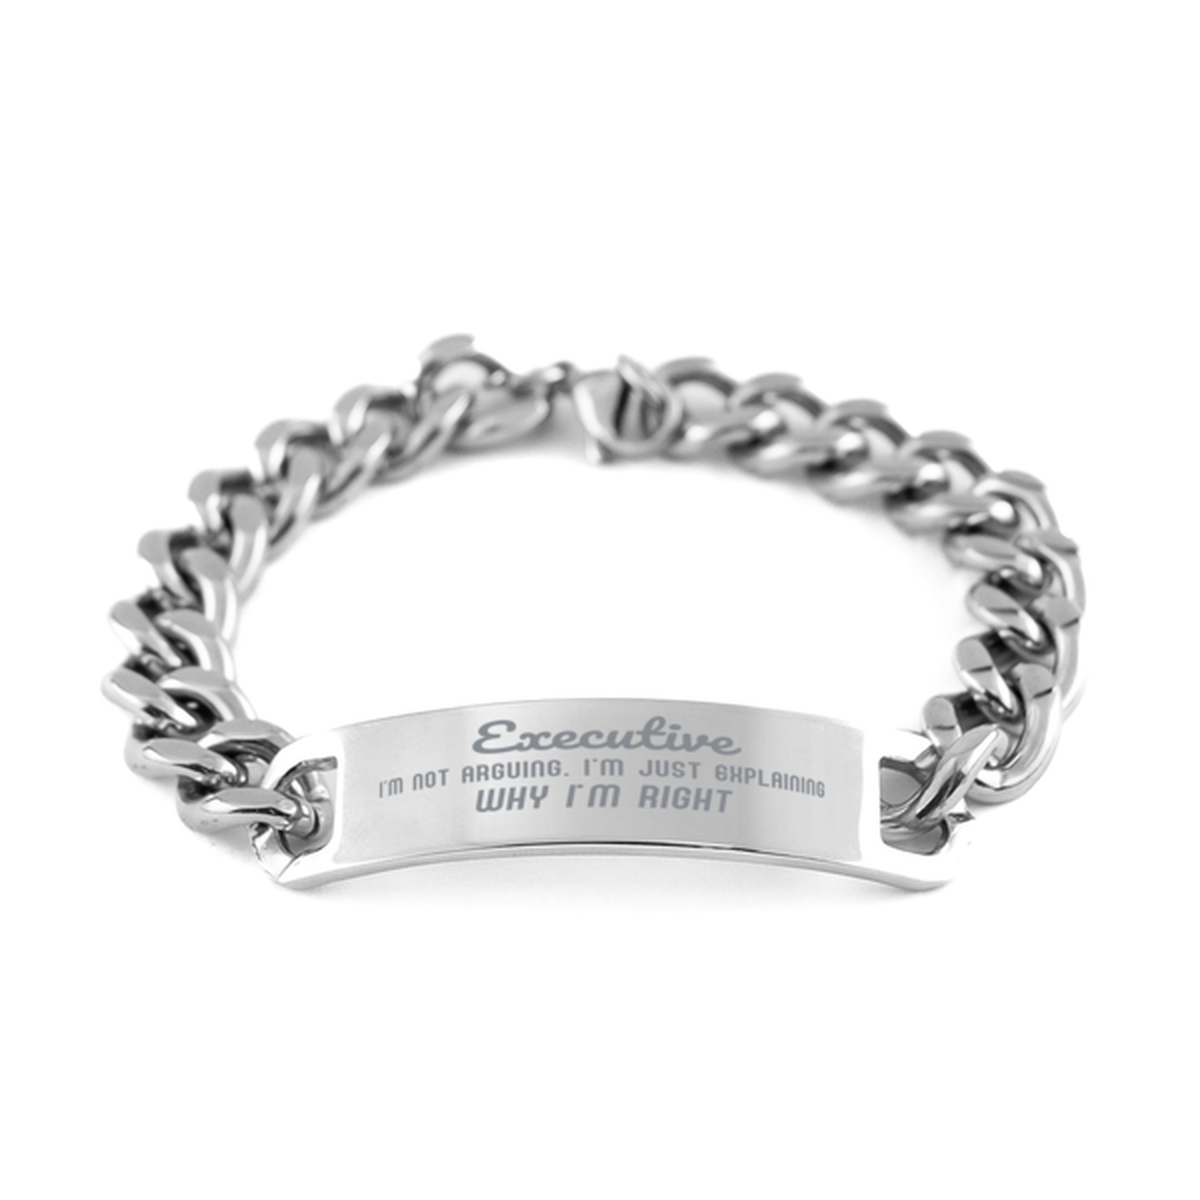 Executive I'm not Arguing. I'm Just Explaining Why I'm RIGHT Cuban Chain Stainless Steel Bracelet, Graduation Birthday Christmas Executive Gifts For Executive Funny Saying Quote Present for Men Women Coworker